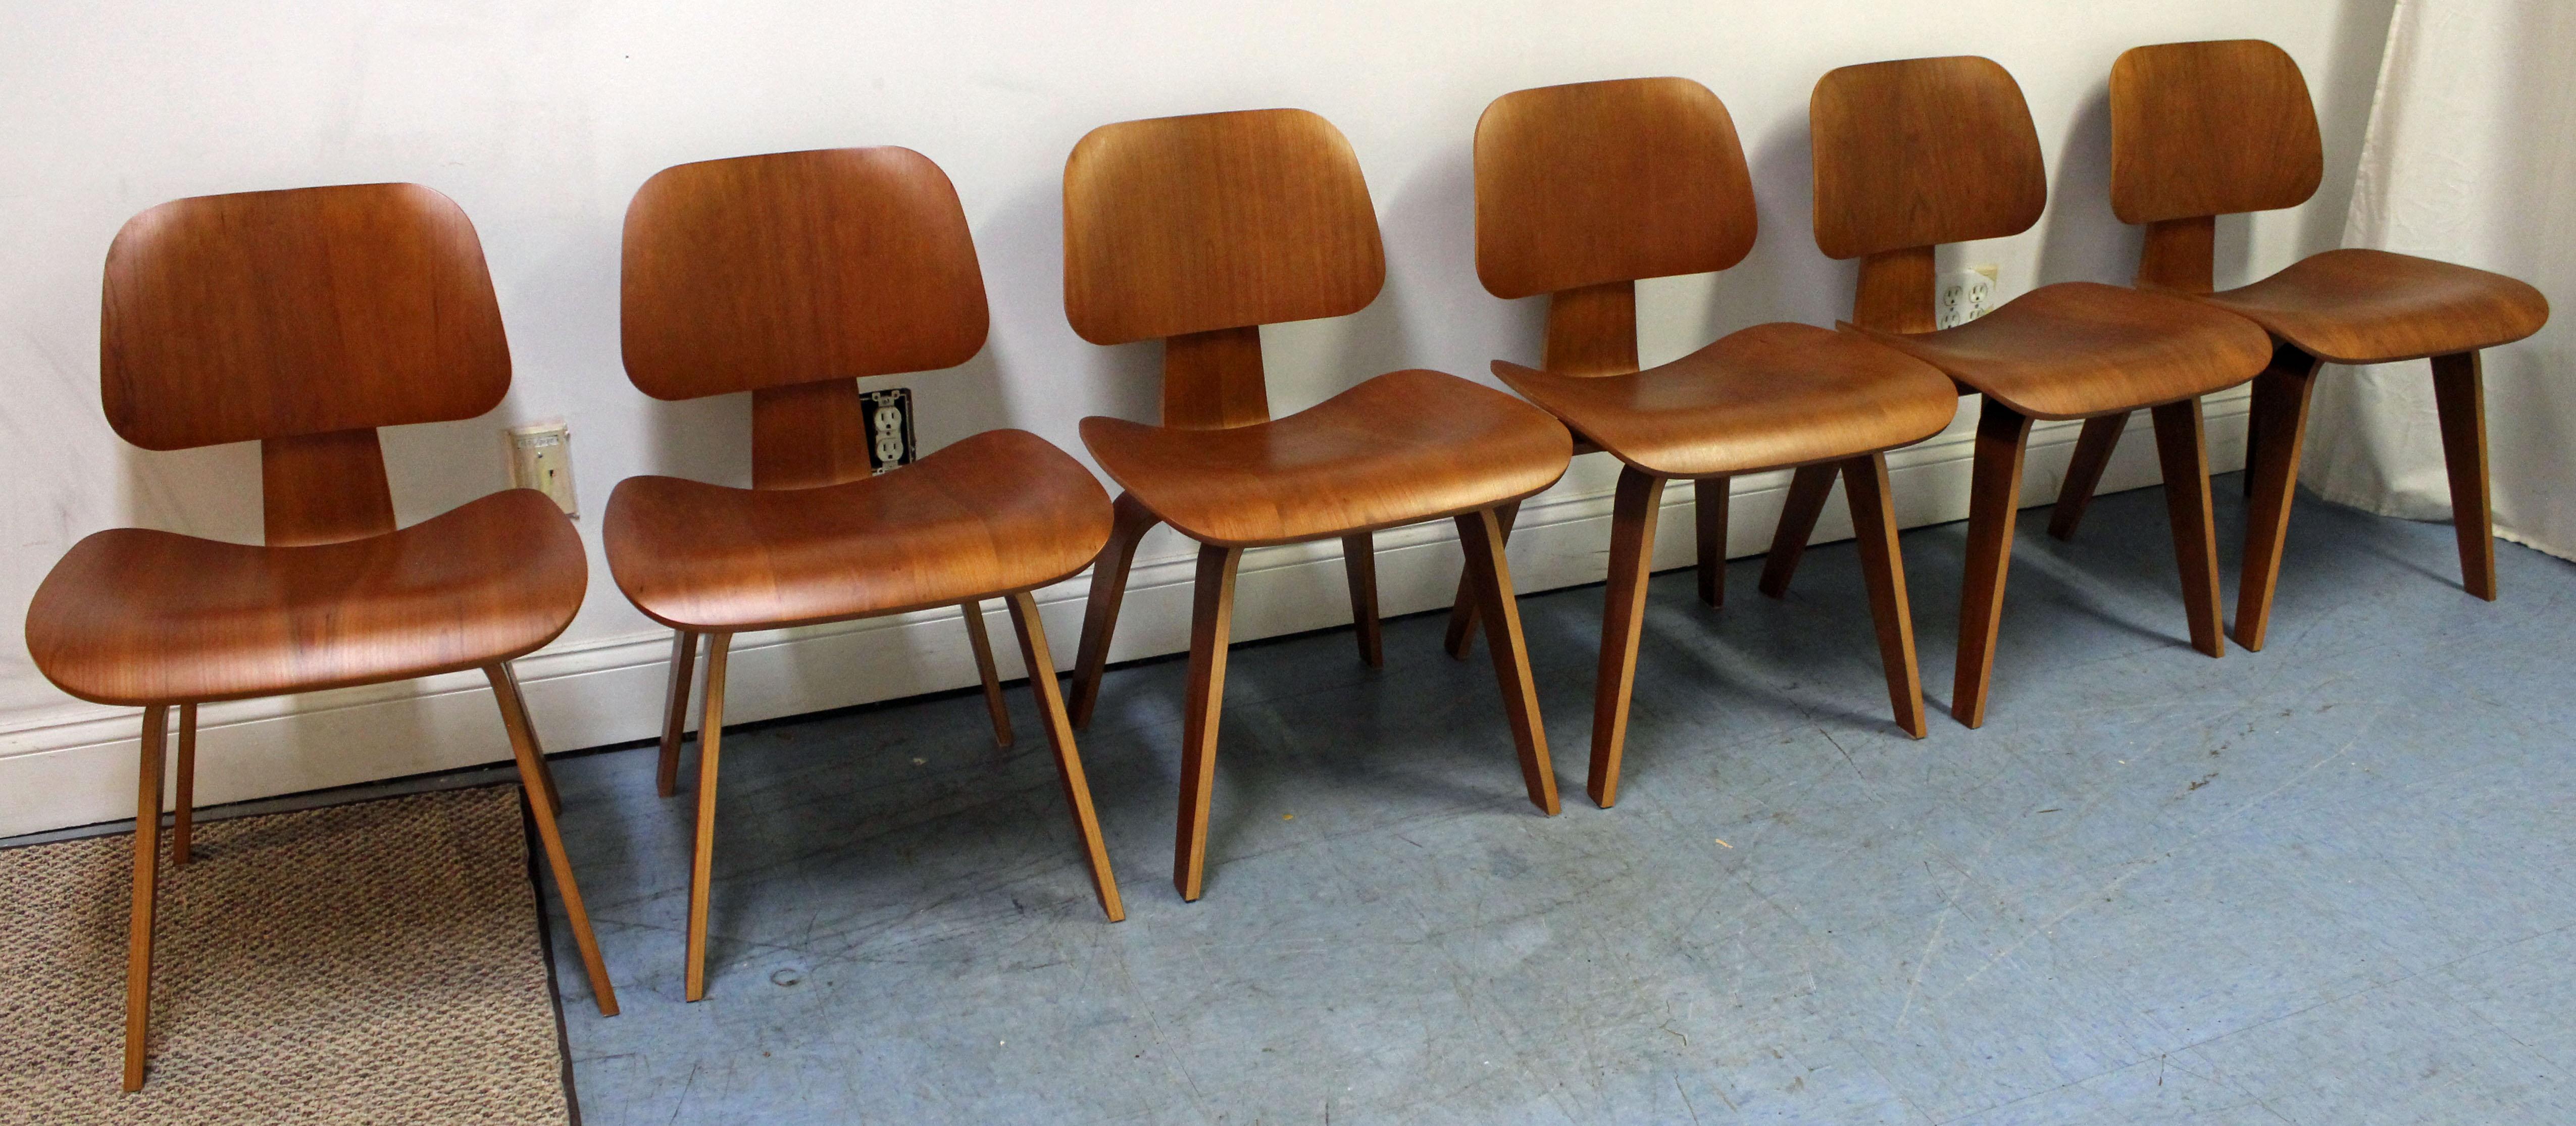 What a find. Offered is a very cool set of six Mid-Century Modern dining chairs, designed by Eames for Herman Miller. These chairs are made of molded plywood in a natural cherry finish. Expertly crafted with a molded seat and back, this chair